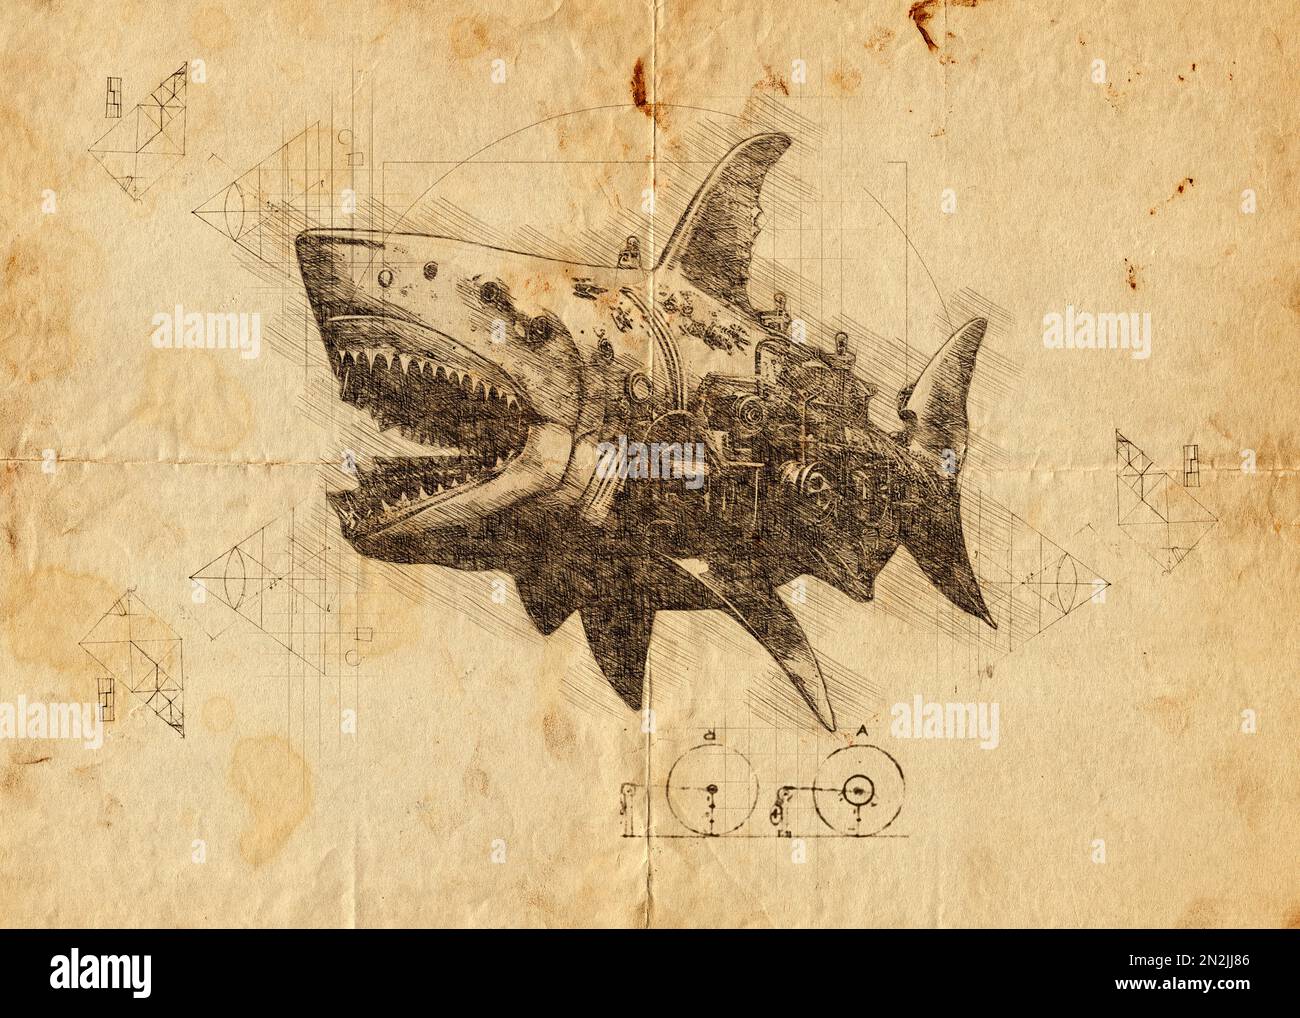 Digital hand drawn illustration or drawing of a shark with robot parts Stock Photo